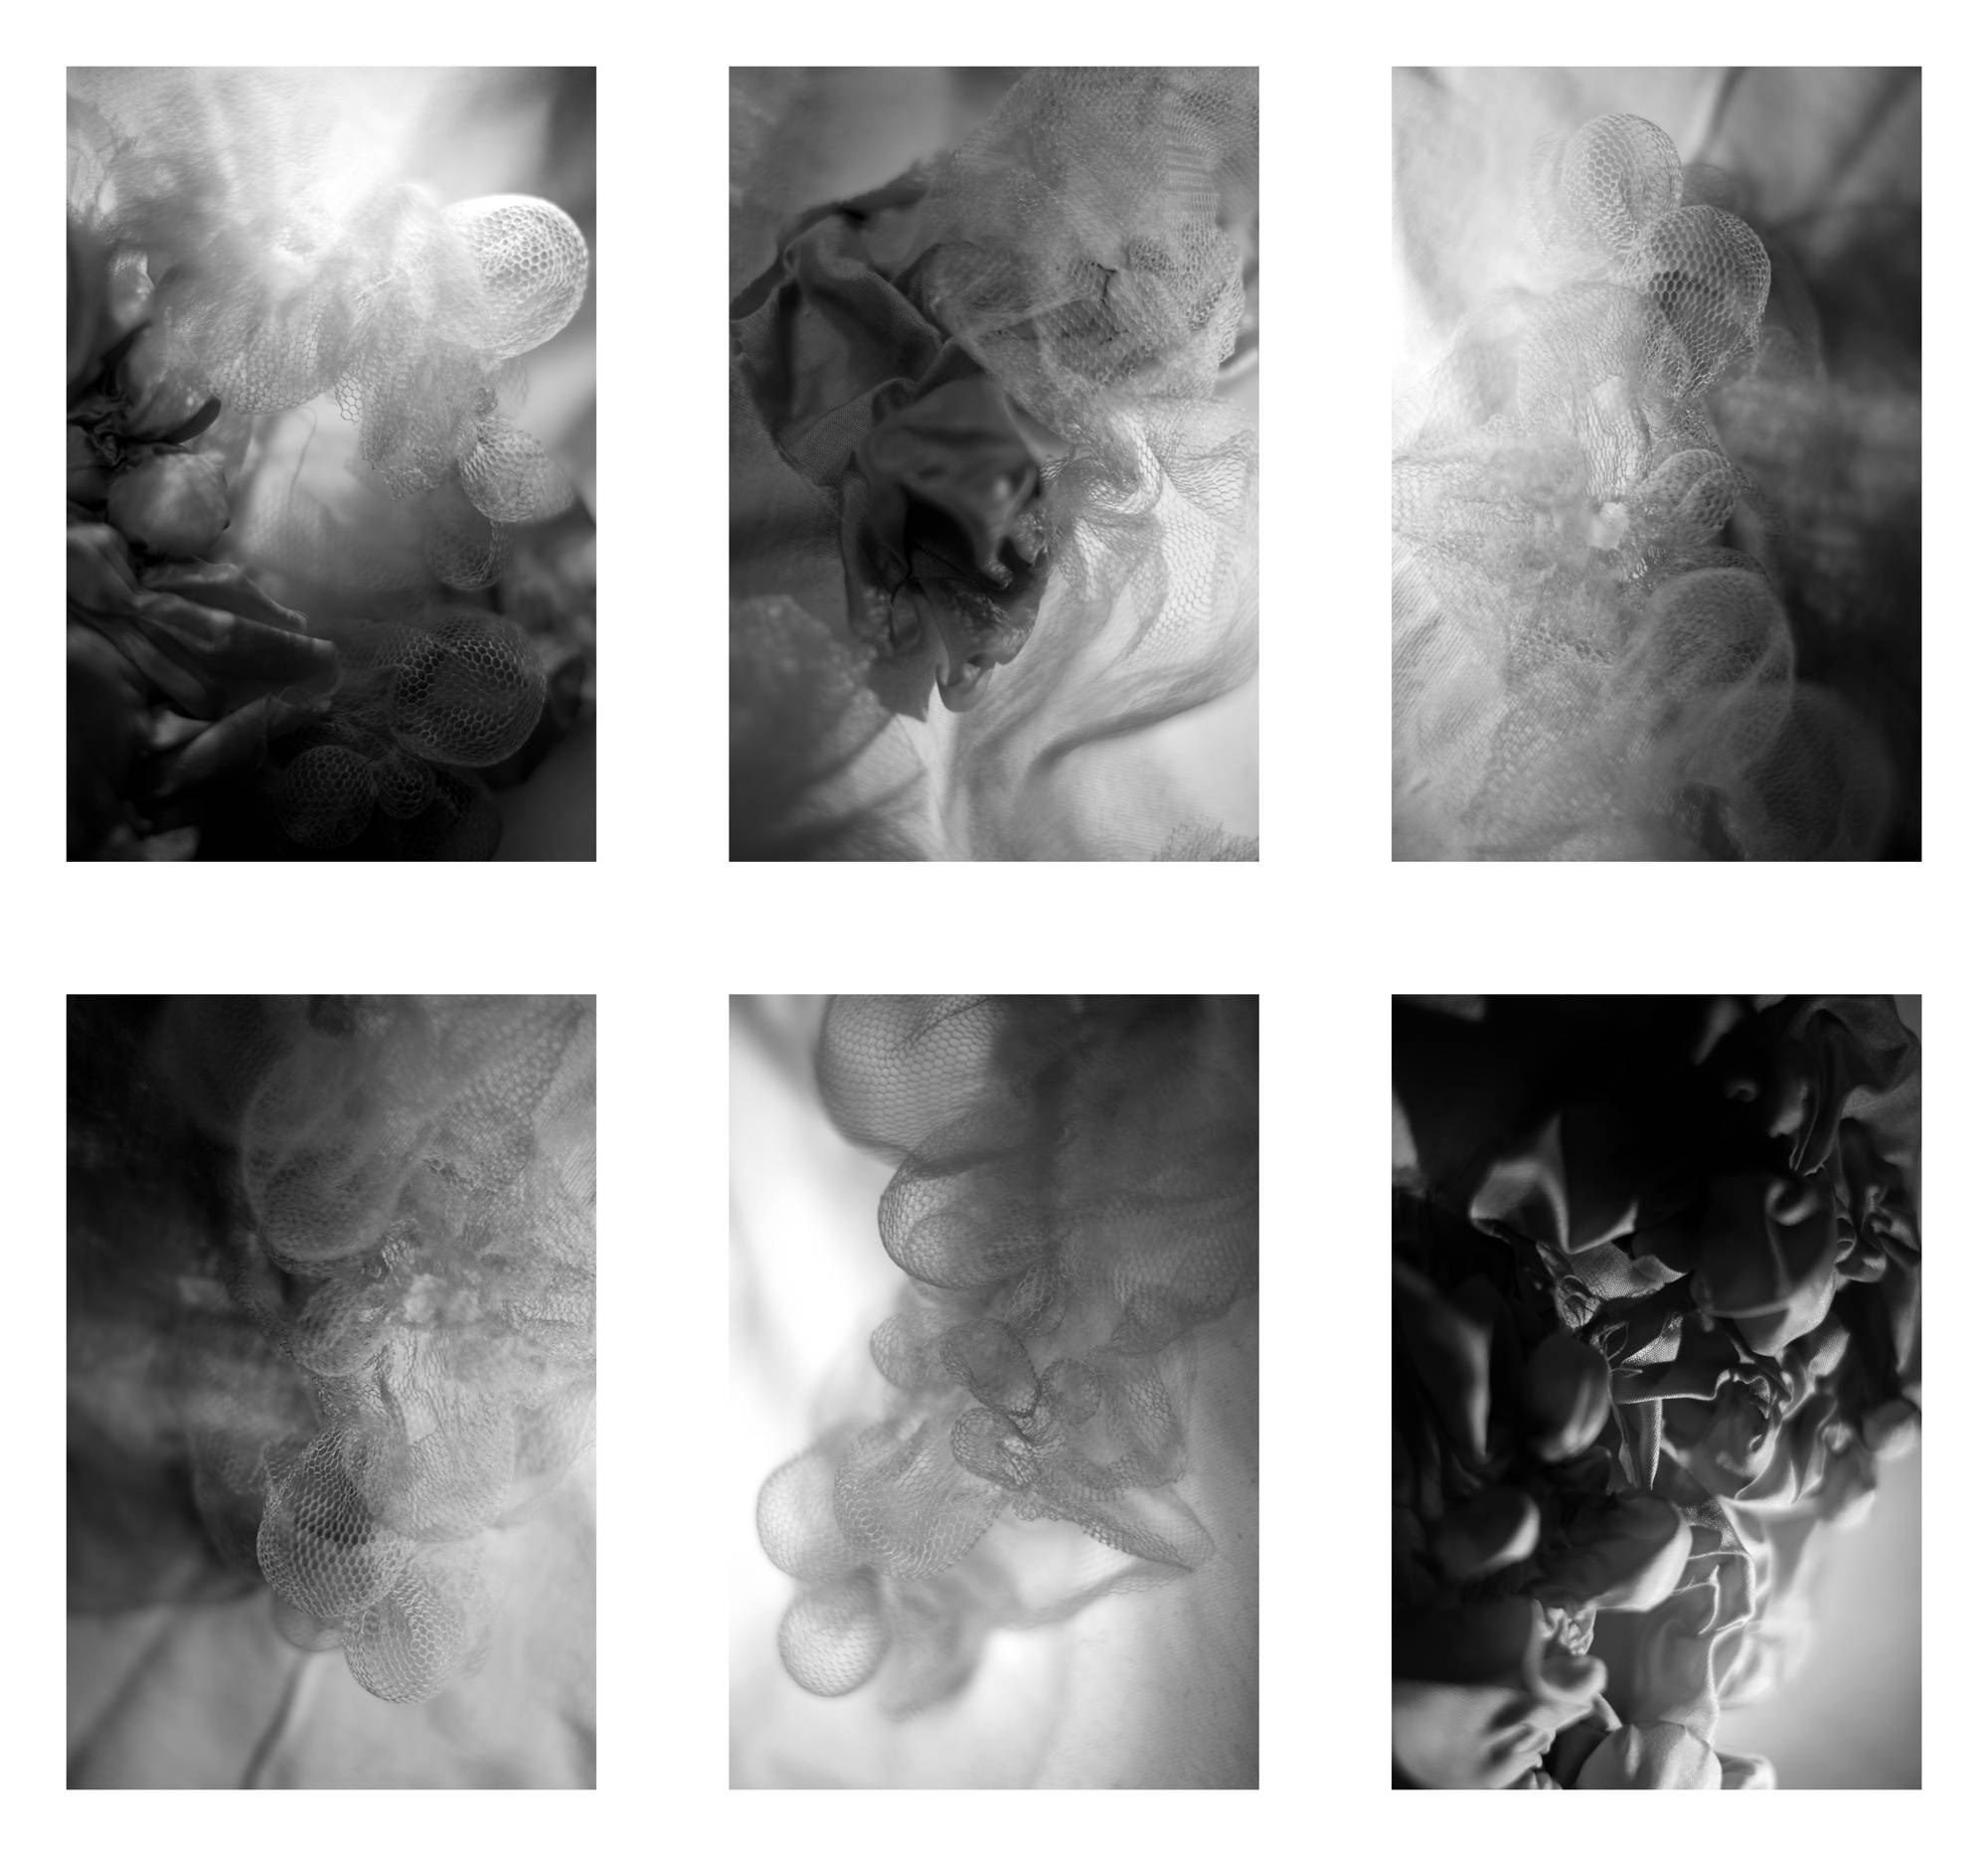 I worked with different textiles and fabric manipulation techniques to create different concepts of organic form. I shot the series with high-contrast lighting and macro photography to help in creating an immersive atmosphere of nebulousness and ambiguity. The fabric takes on a new life and is no longer cloth but something alive and growing. (©I worked with different textiles and fabric manipulation techniques to create different concepts of organic form. I shot the series with high-contrast lighting and macro photography to help in creating an immersive atmosphere of nebulousness and ambiguity. The fabric takes on a new life and is no longer cloth but something alive and growing.)